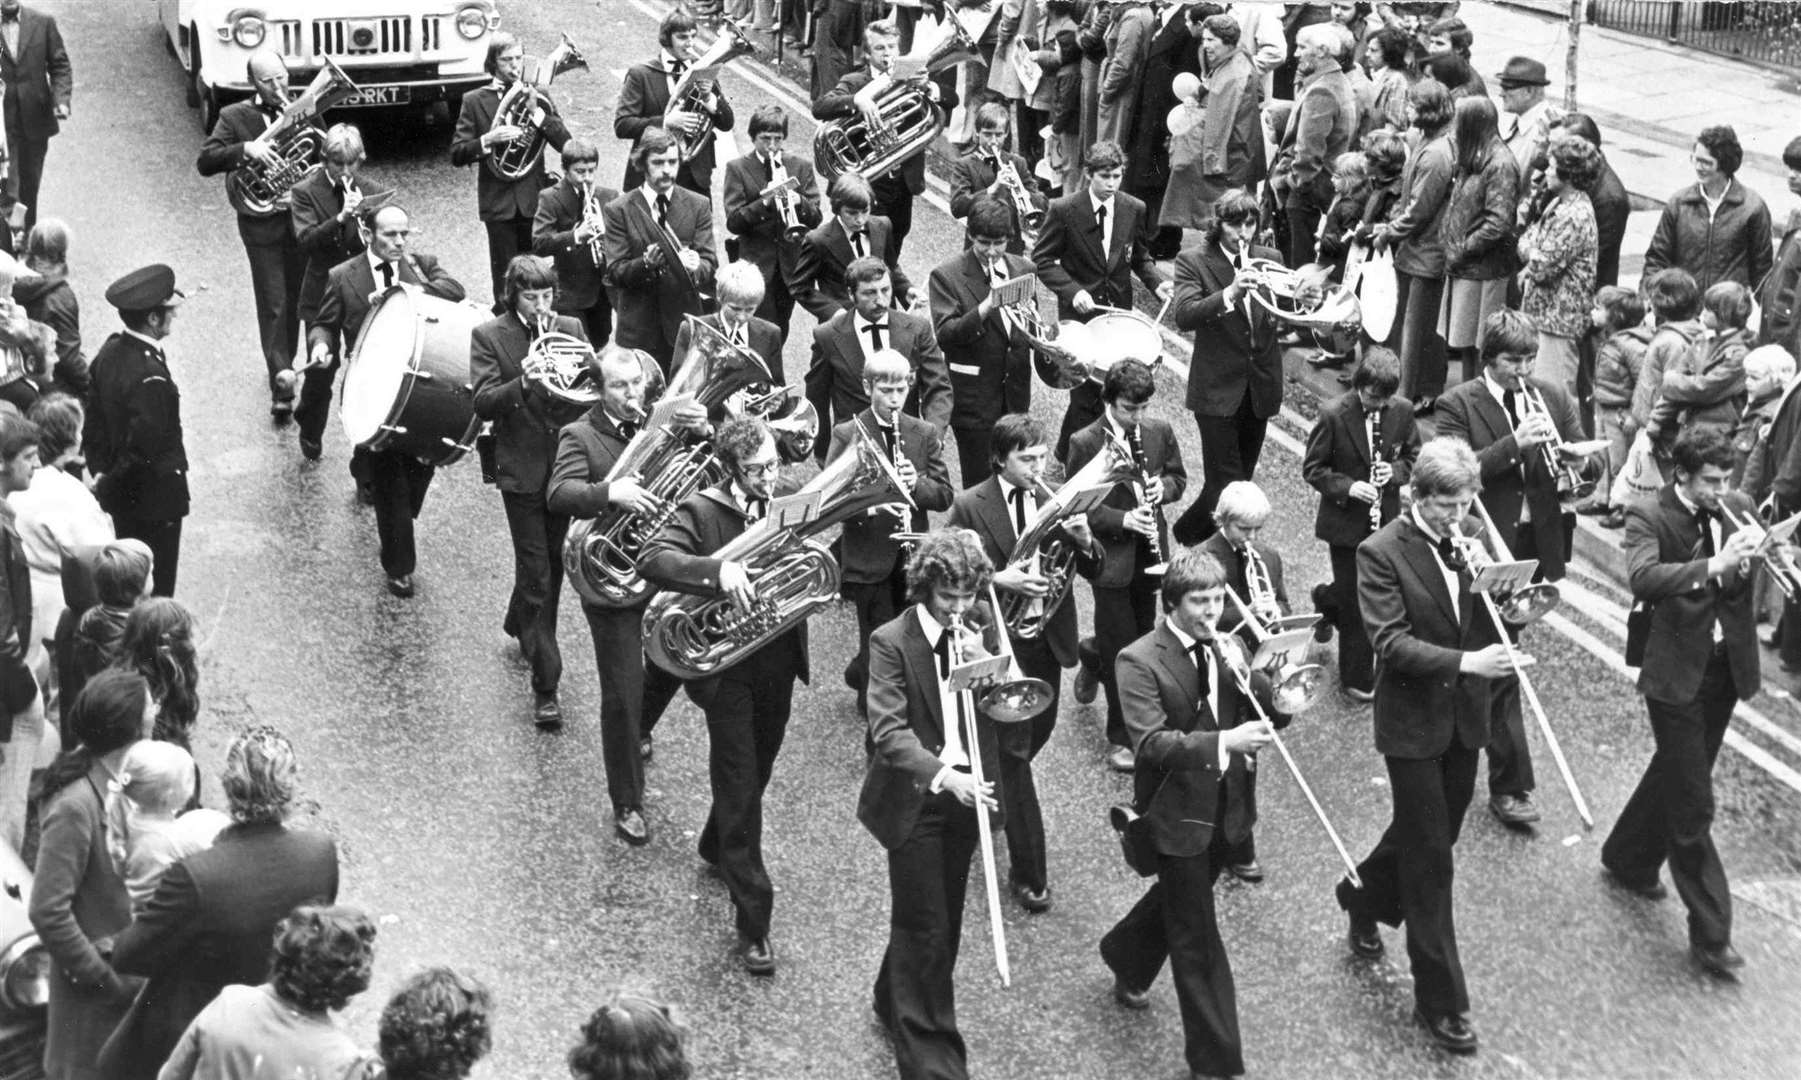 The twin town band from Bad Munstereifel on parade through the streets of Ashford during the September 1976 carnival